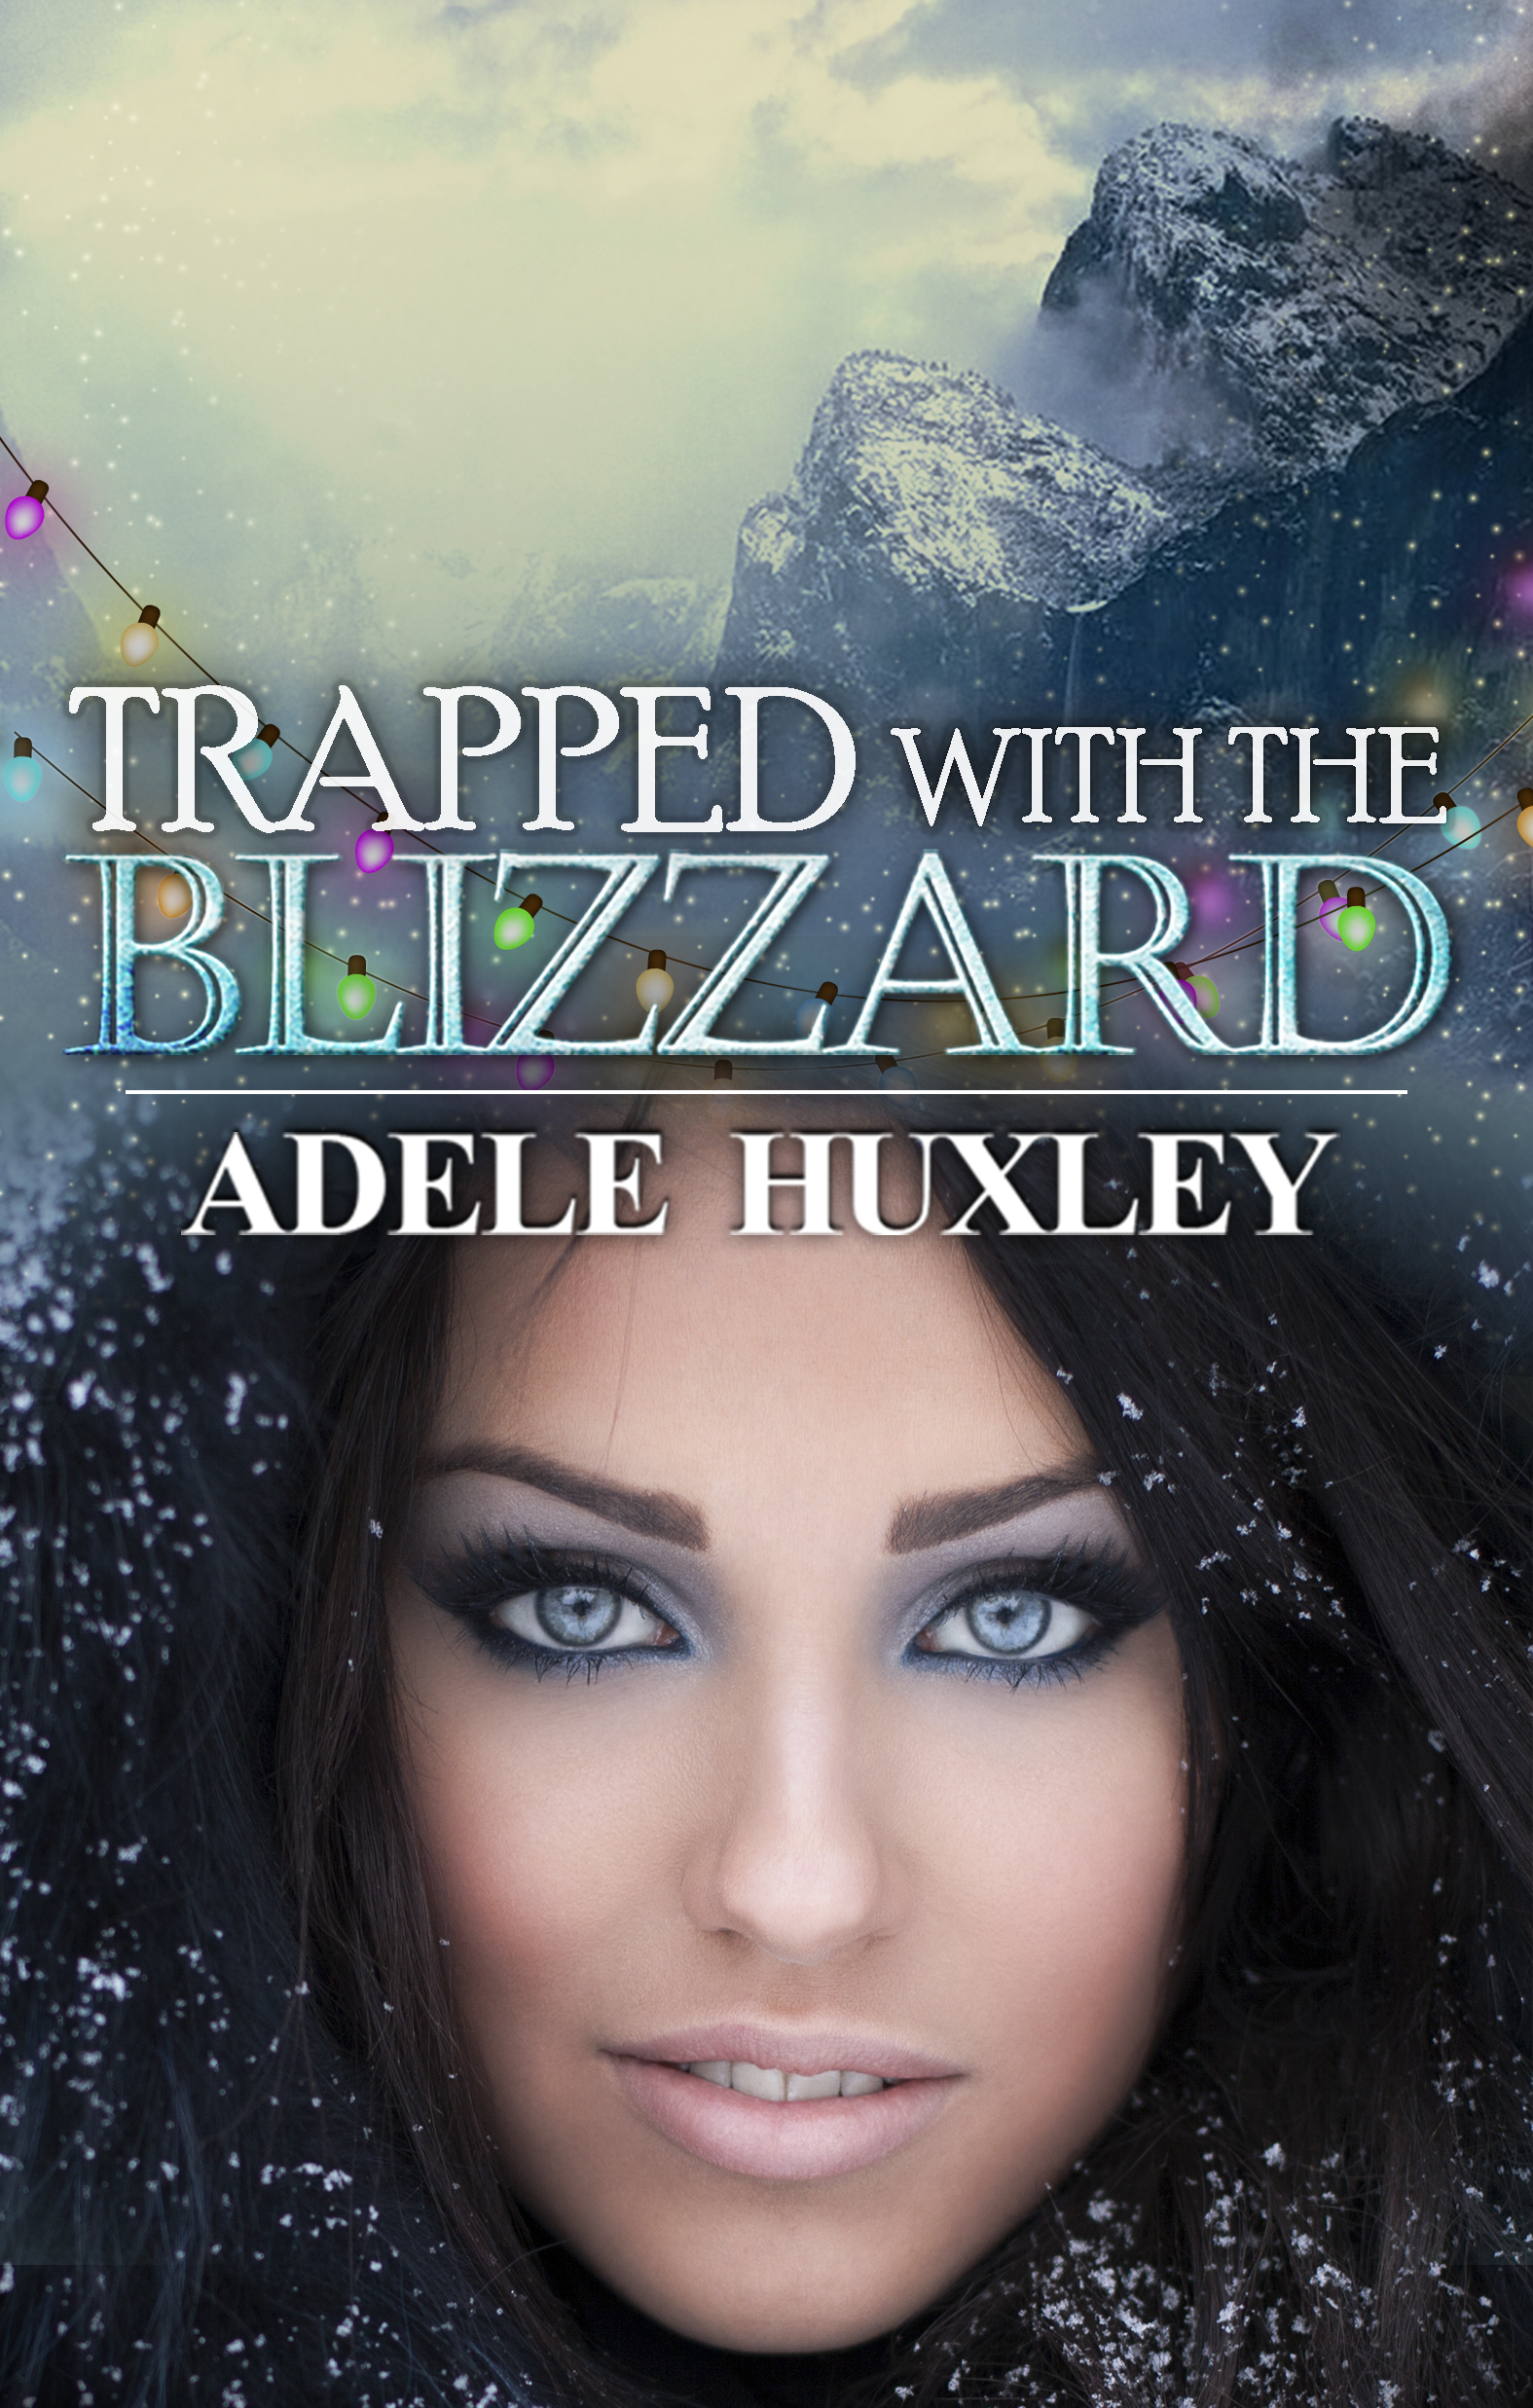 Book Tour: Trapped with the Blizzard by Adele Huxley